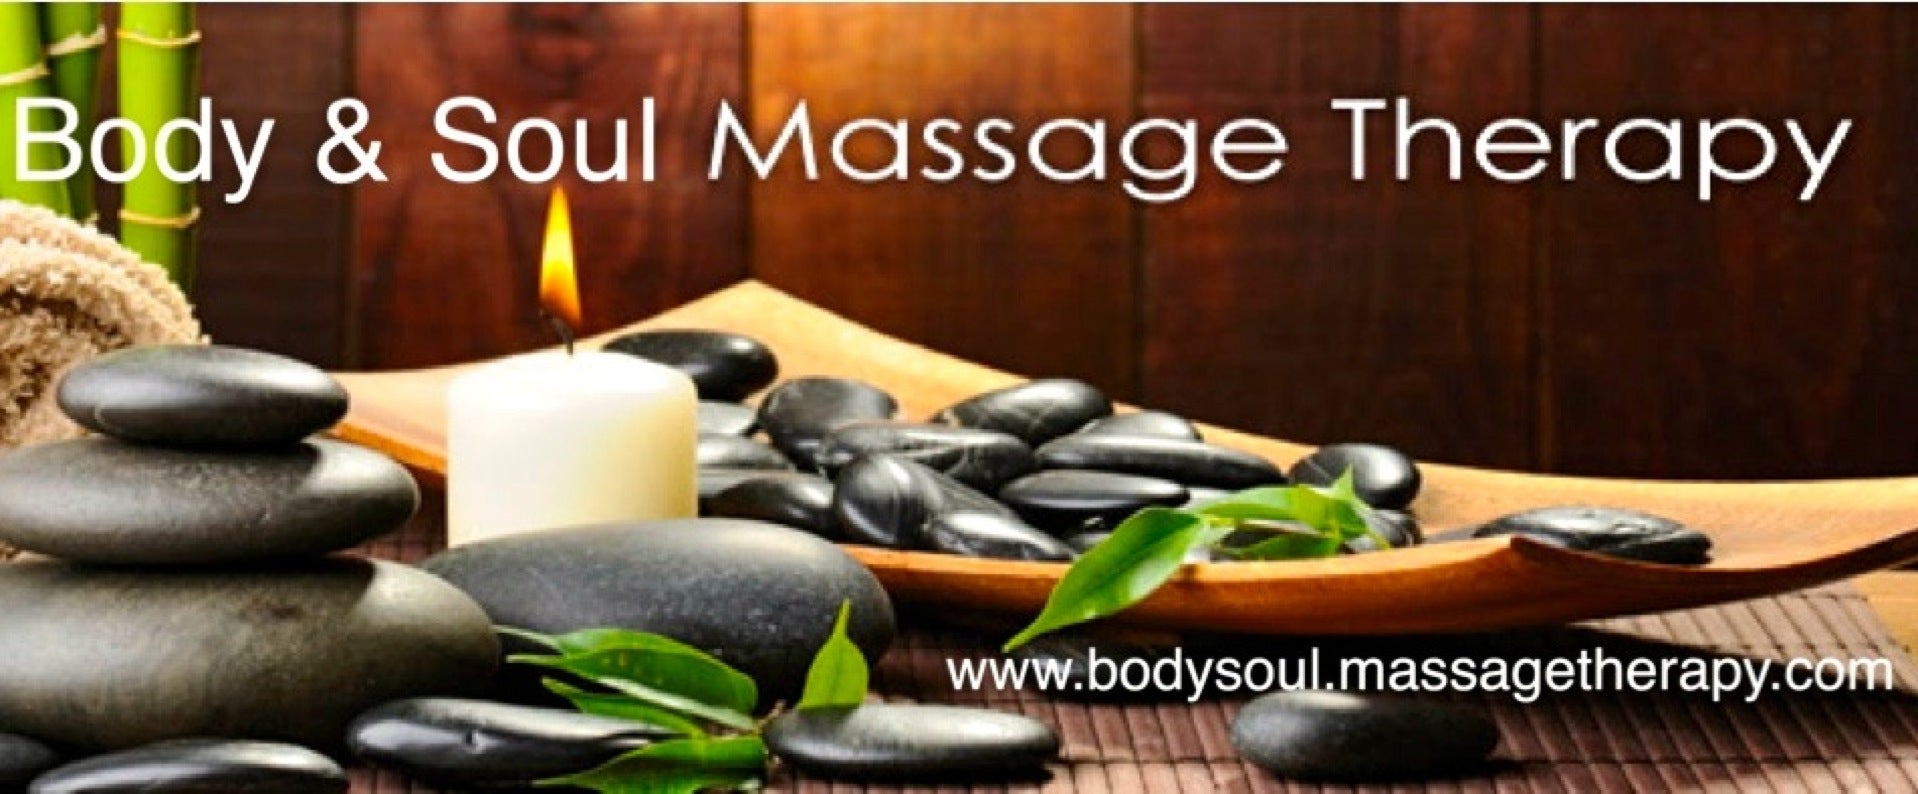 Body And Soul Massage Therapy 1355 W 96th St Indianapolis In Massage Mapquest 3014